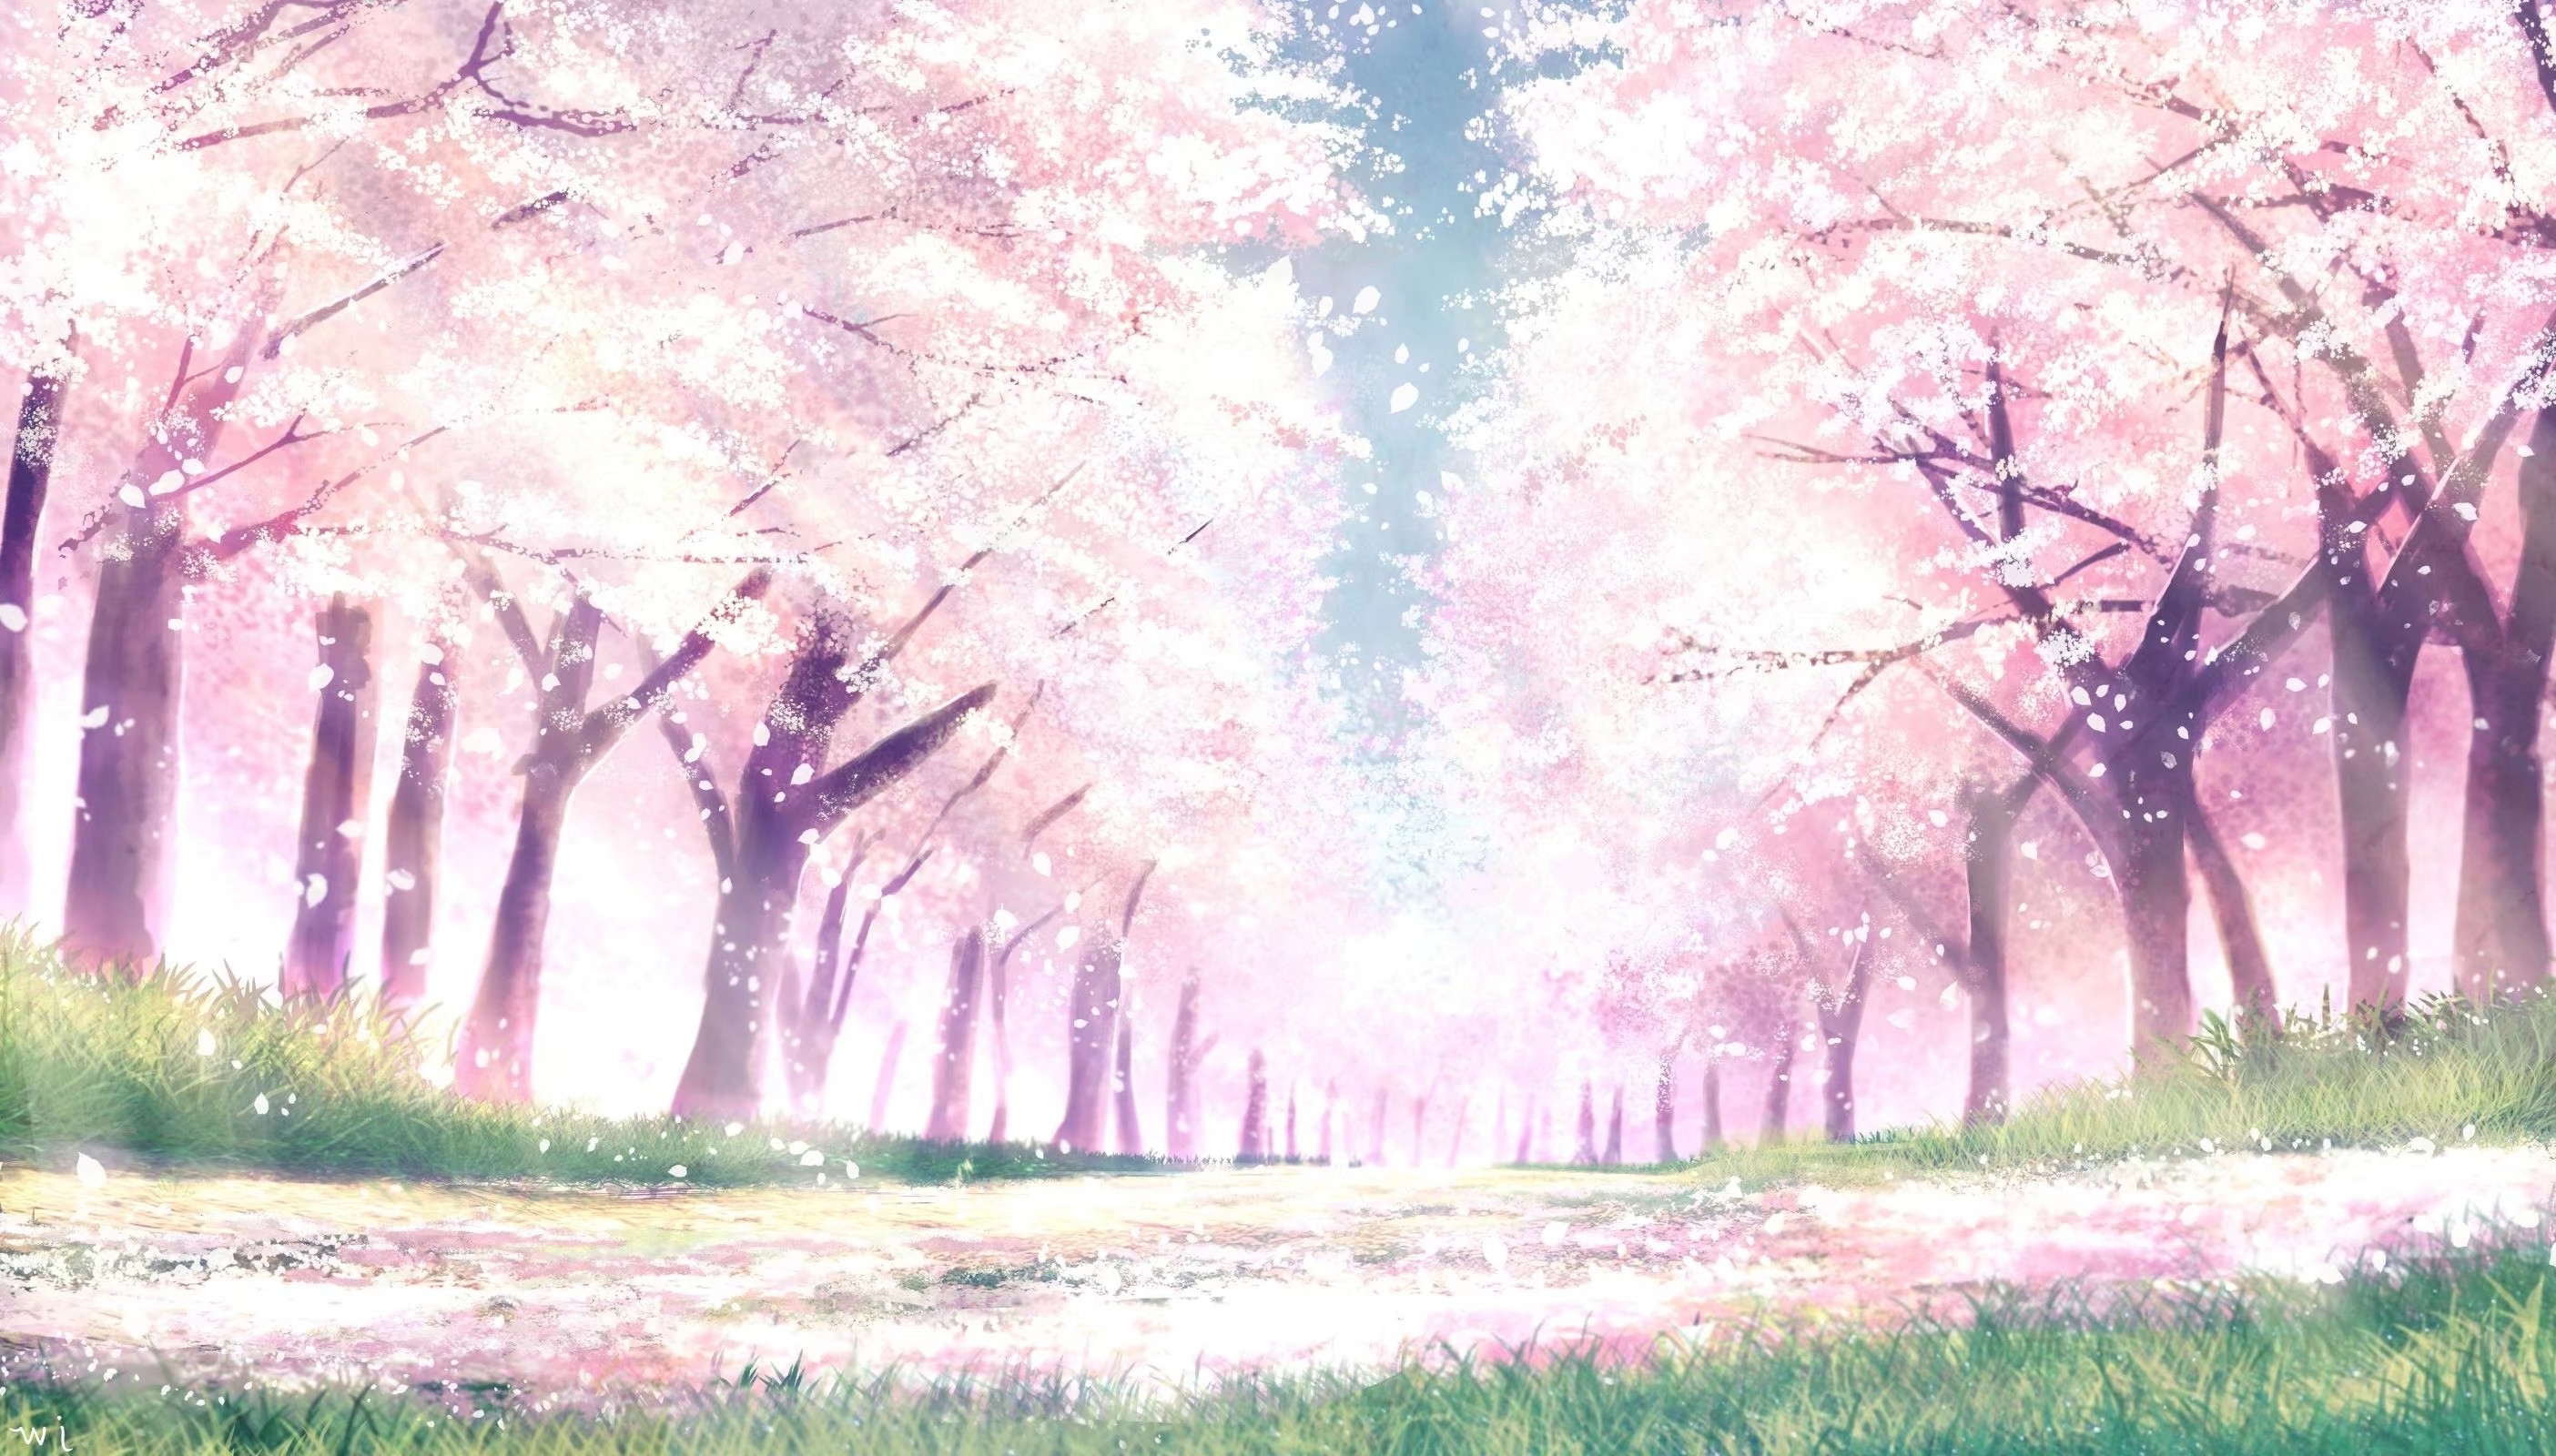 Spring Scenery - Other & Anime Background Wallpapers on Desktop Nexus  (Image 2256424)